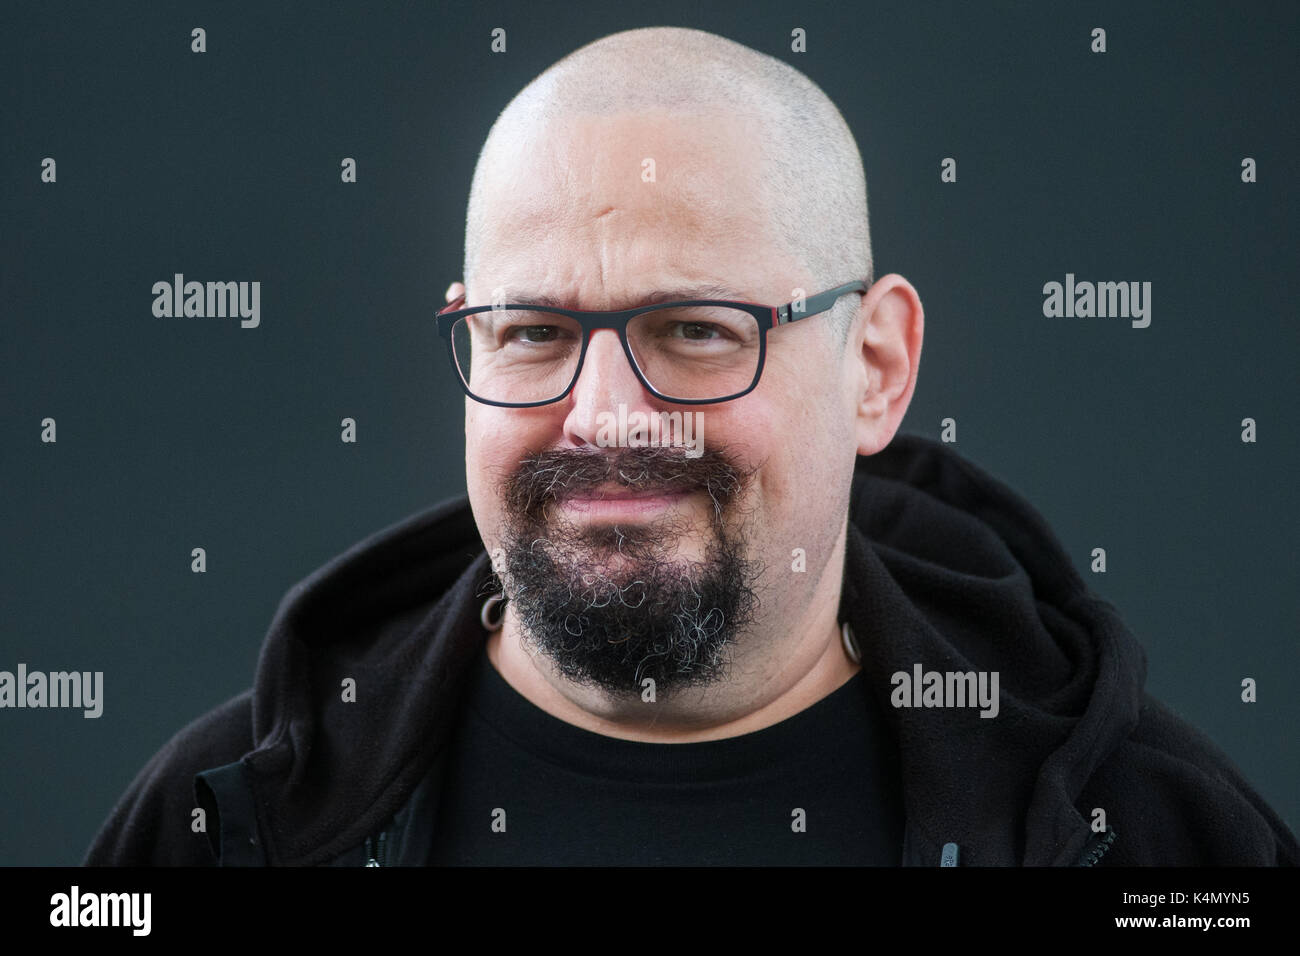 Award-winning British writer of science fiction, Lovecraftian horror, and fantasy Charles Stross attends a photocall during the Edinburgh Internationa Stock Photo